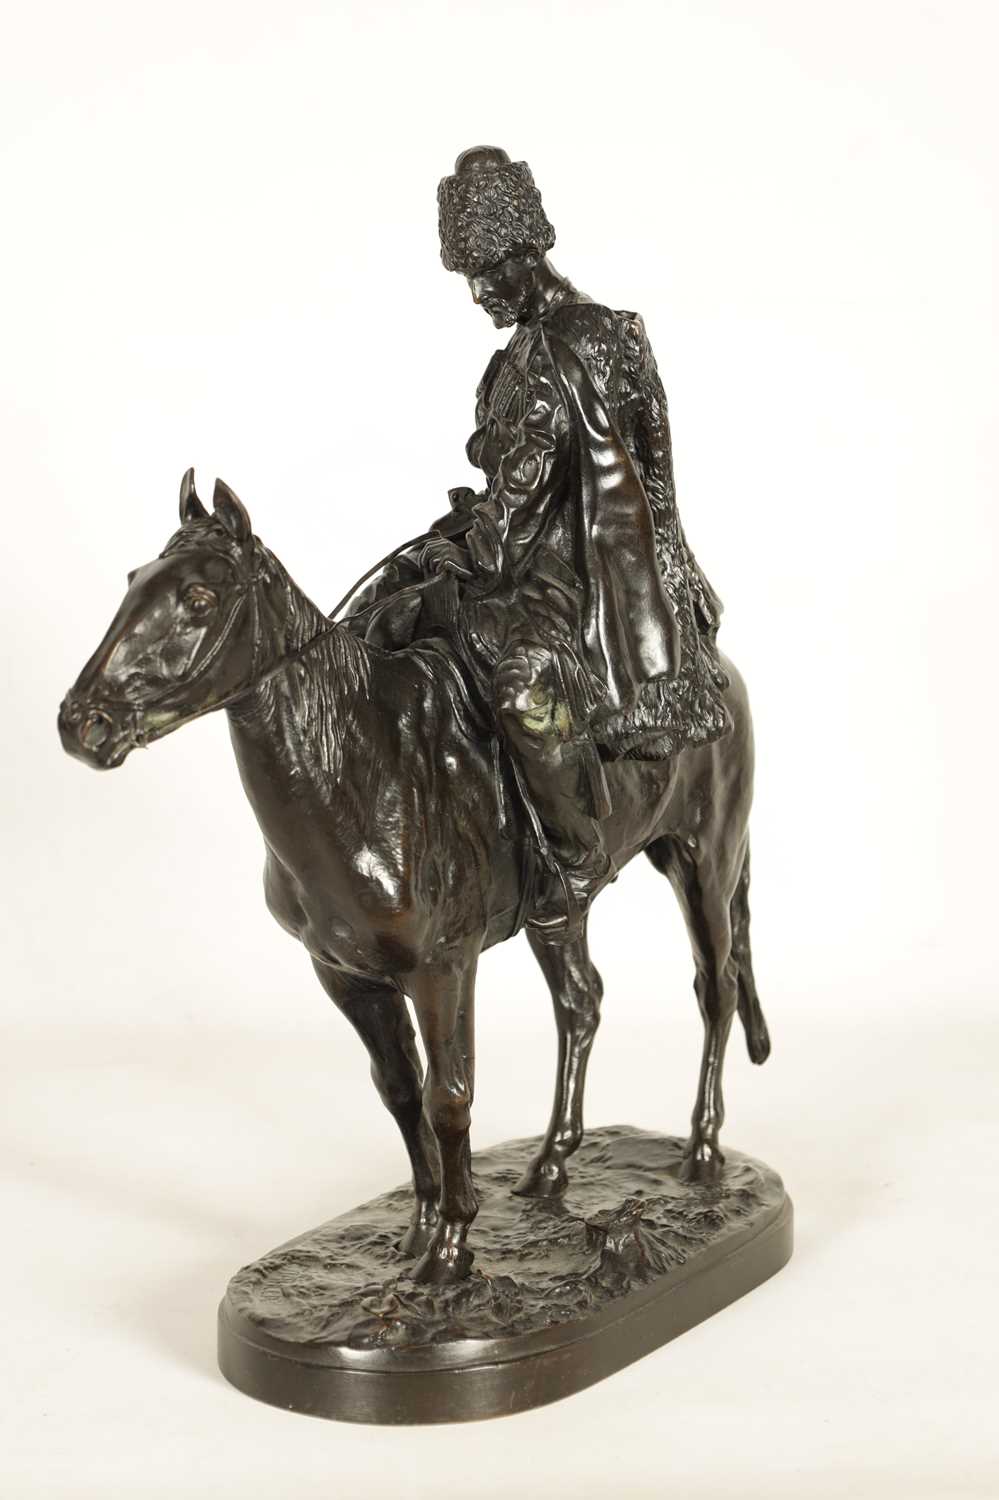 E. NAHCEPE. A LATE 19TH CENTURY RUSSIAN PATINATED BRONZE SCULPTURE - Image 8 of 21